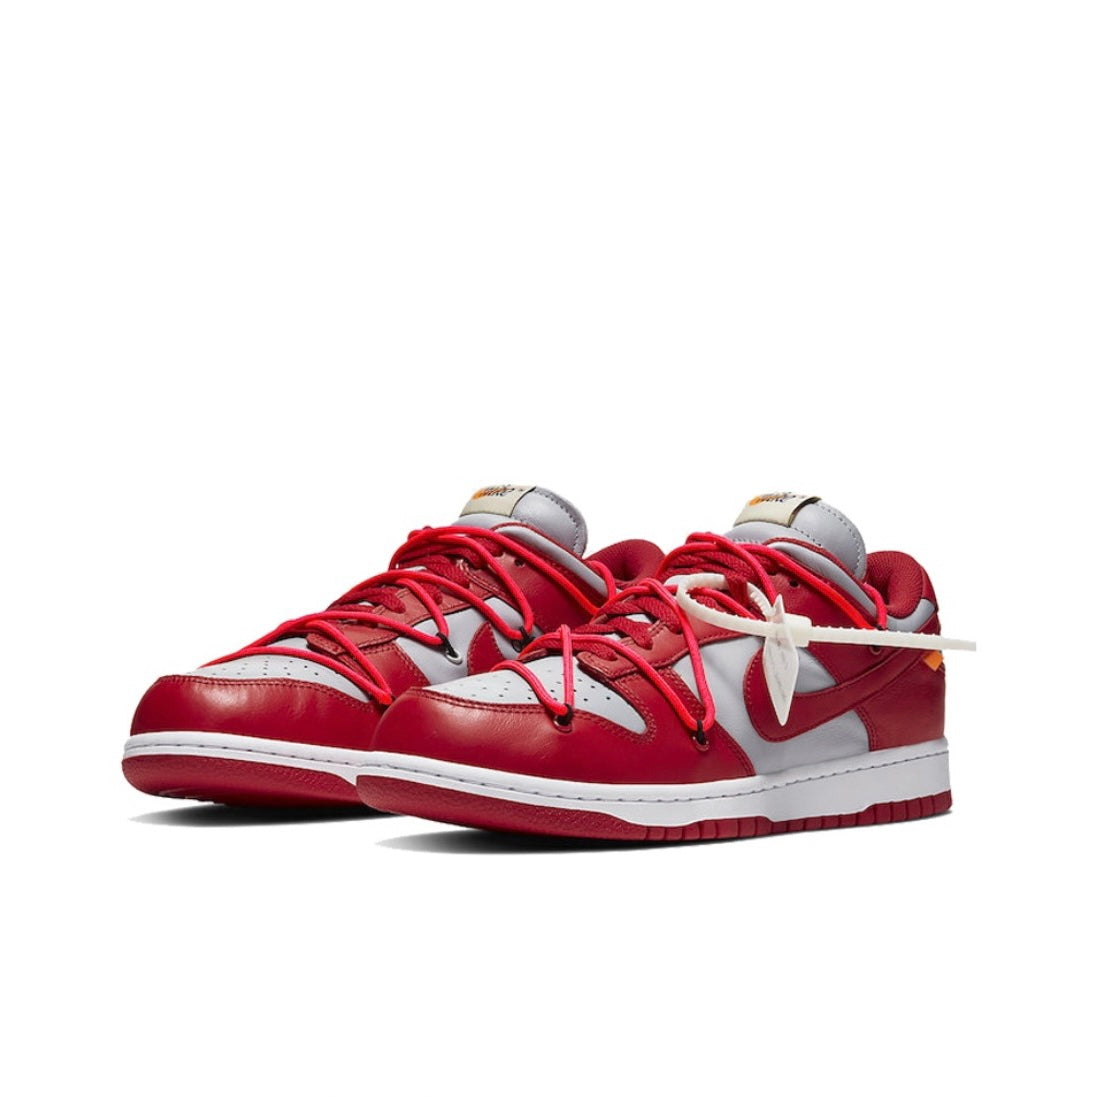 NIKE DUNK LOW - OFF WHITE UNIVERSITY RED